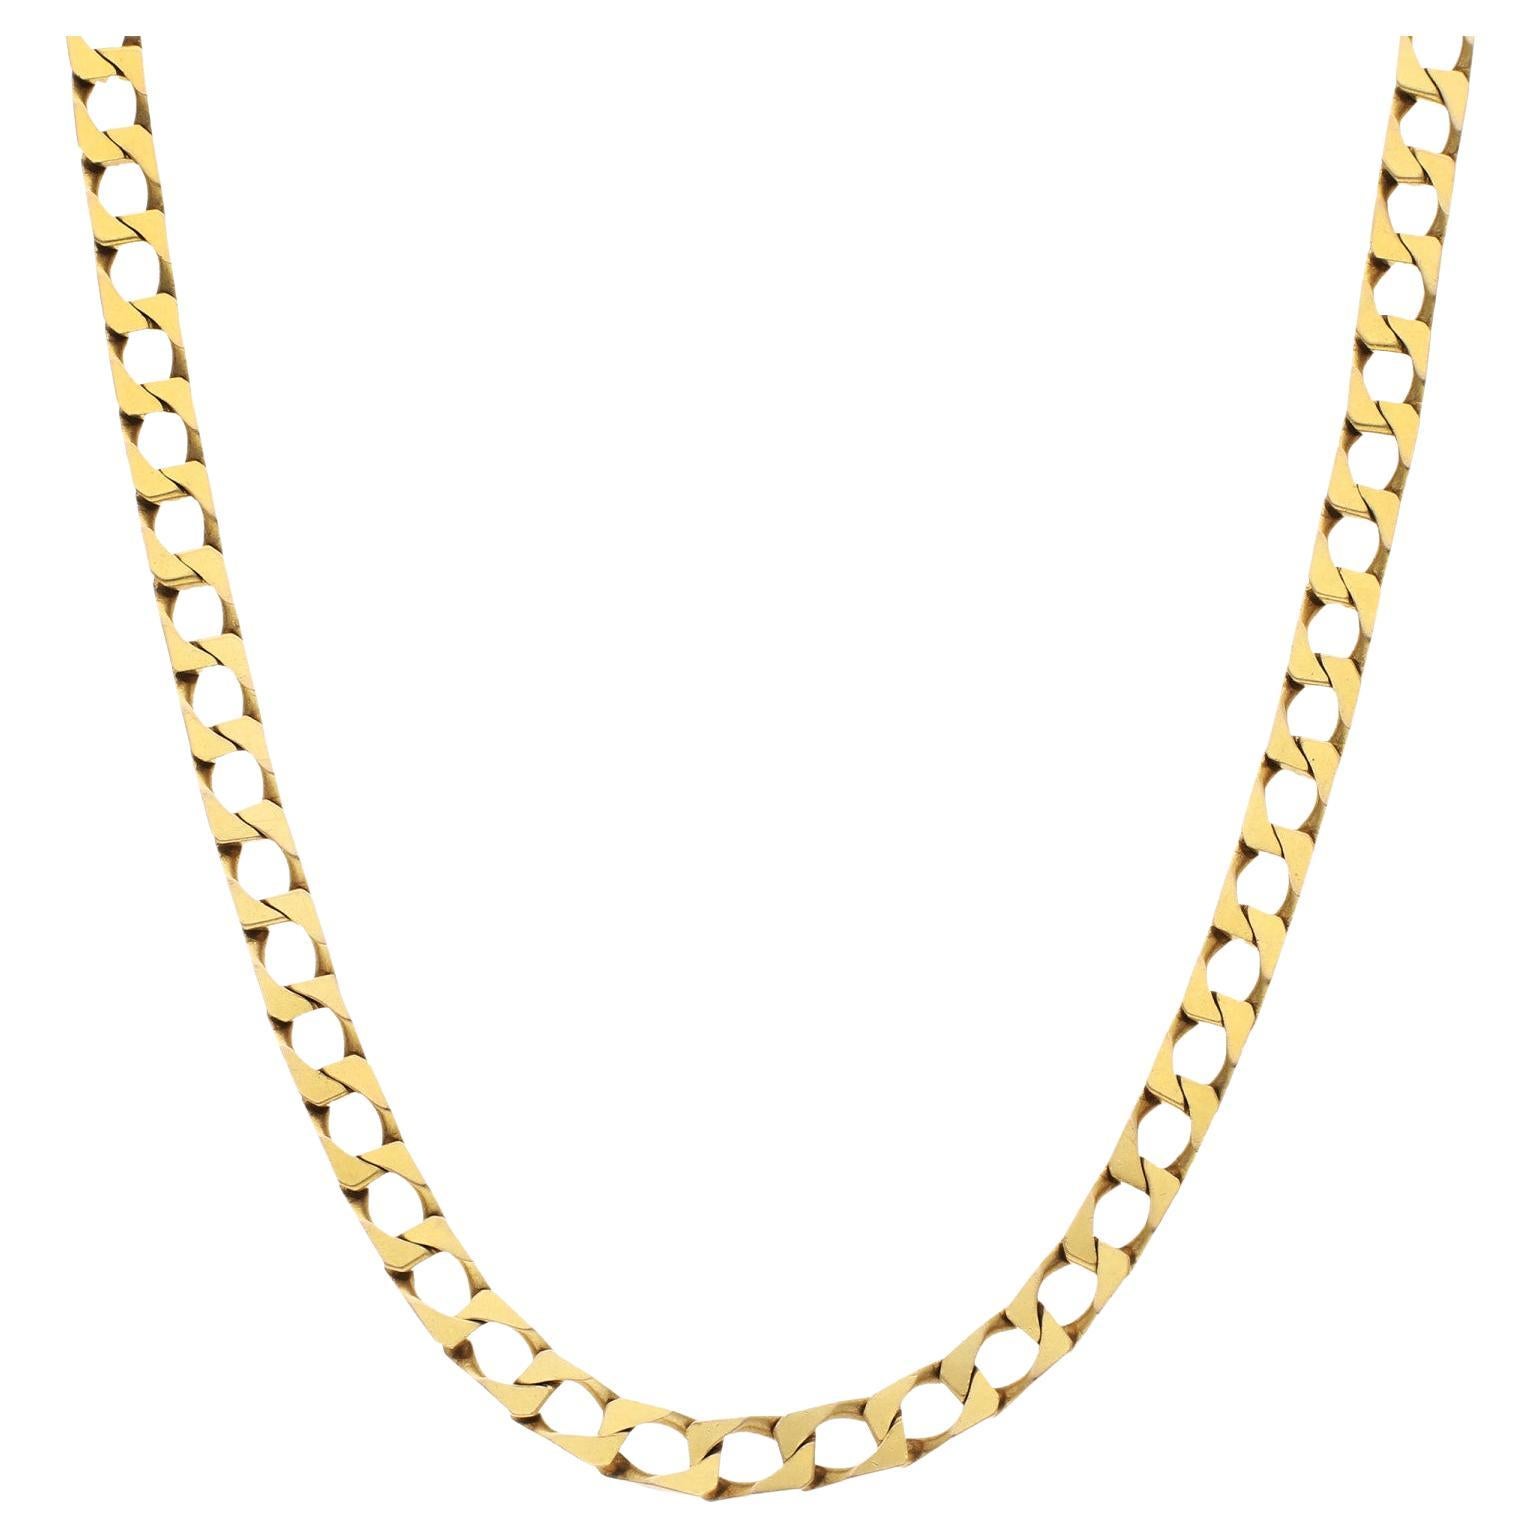 9ct Yellow Gold 29.5 Inch Metric Curb Chain 37.90 grams